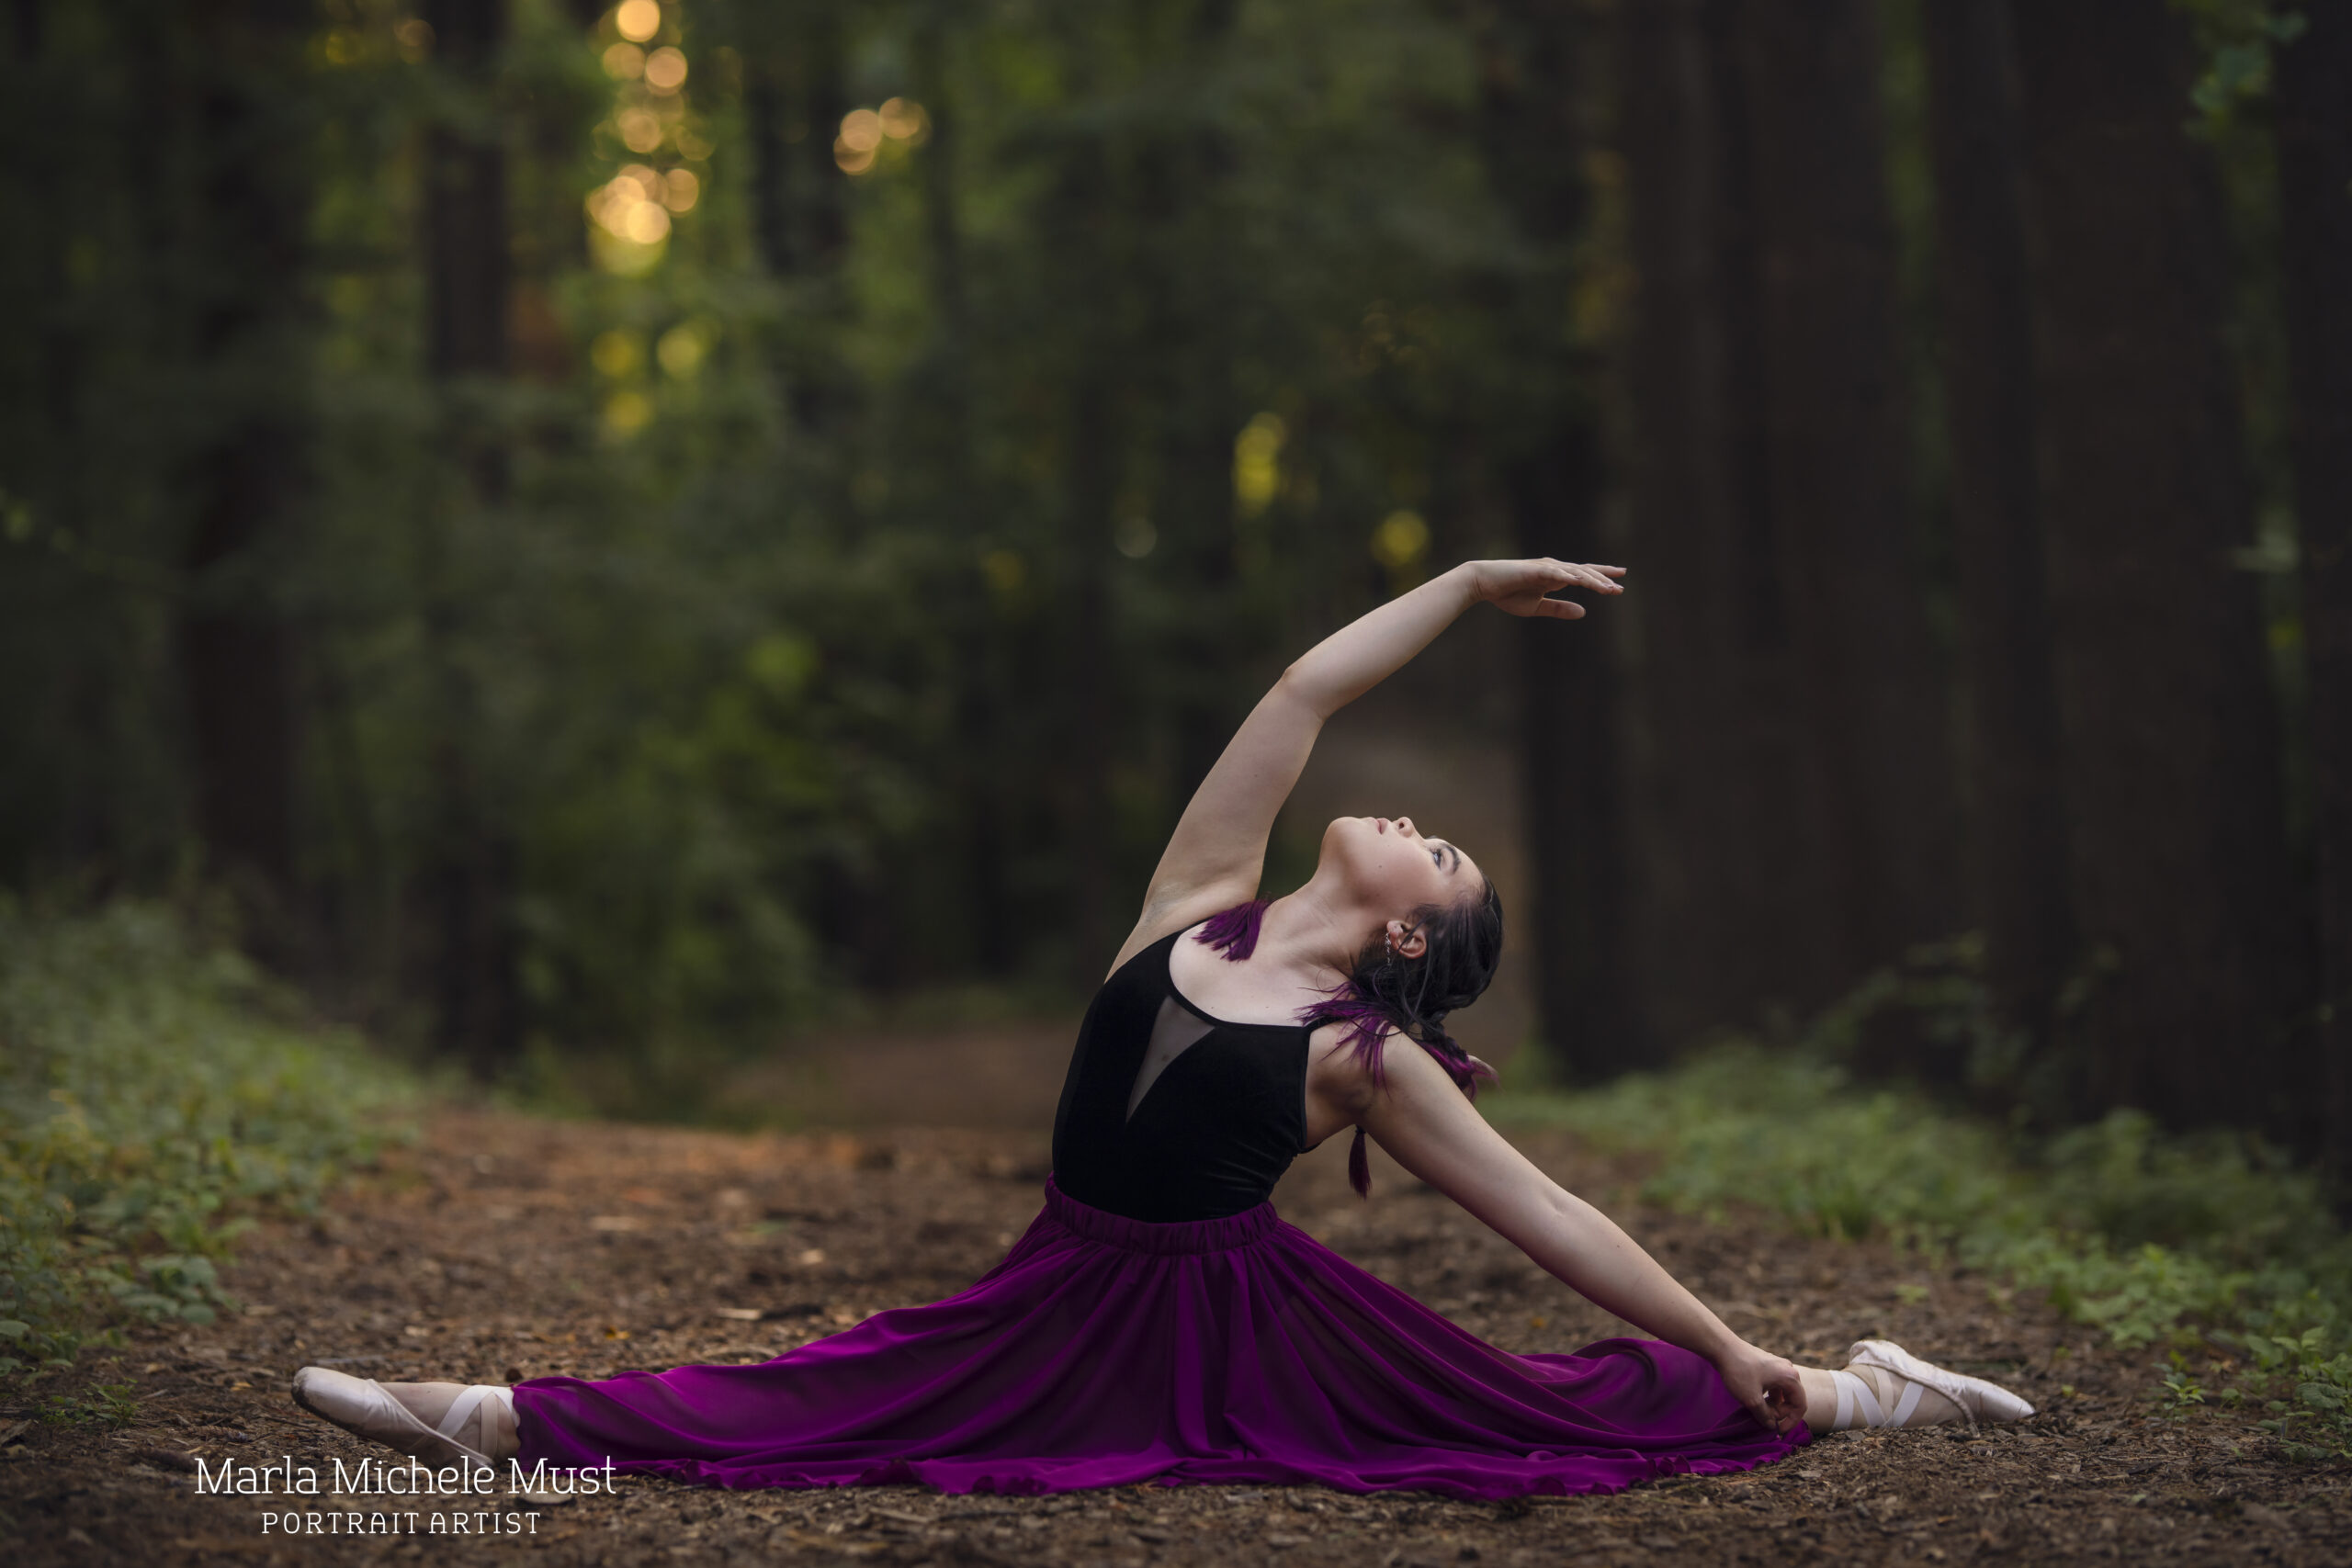 Woman in a flowy skirt does the splits and reaches her arm backwards in the air on a Detroit forest path during a dance photoshoot, taken by a Michigan dance photographer.